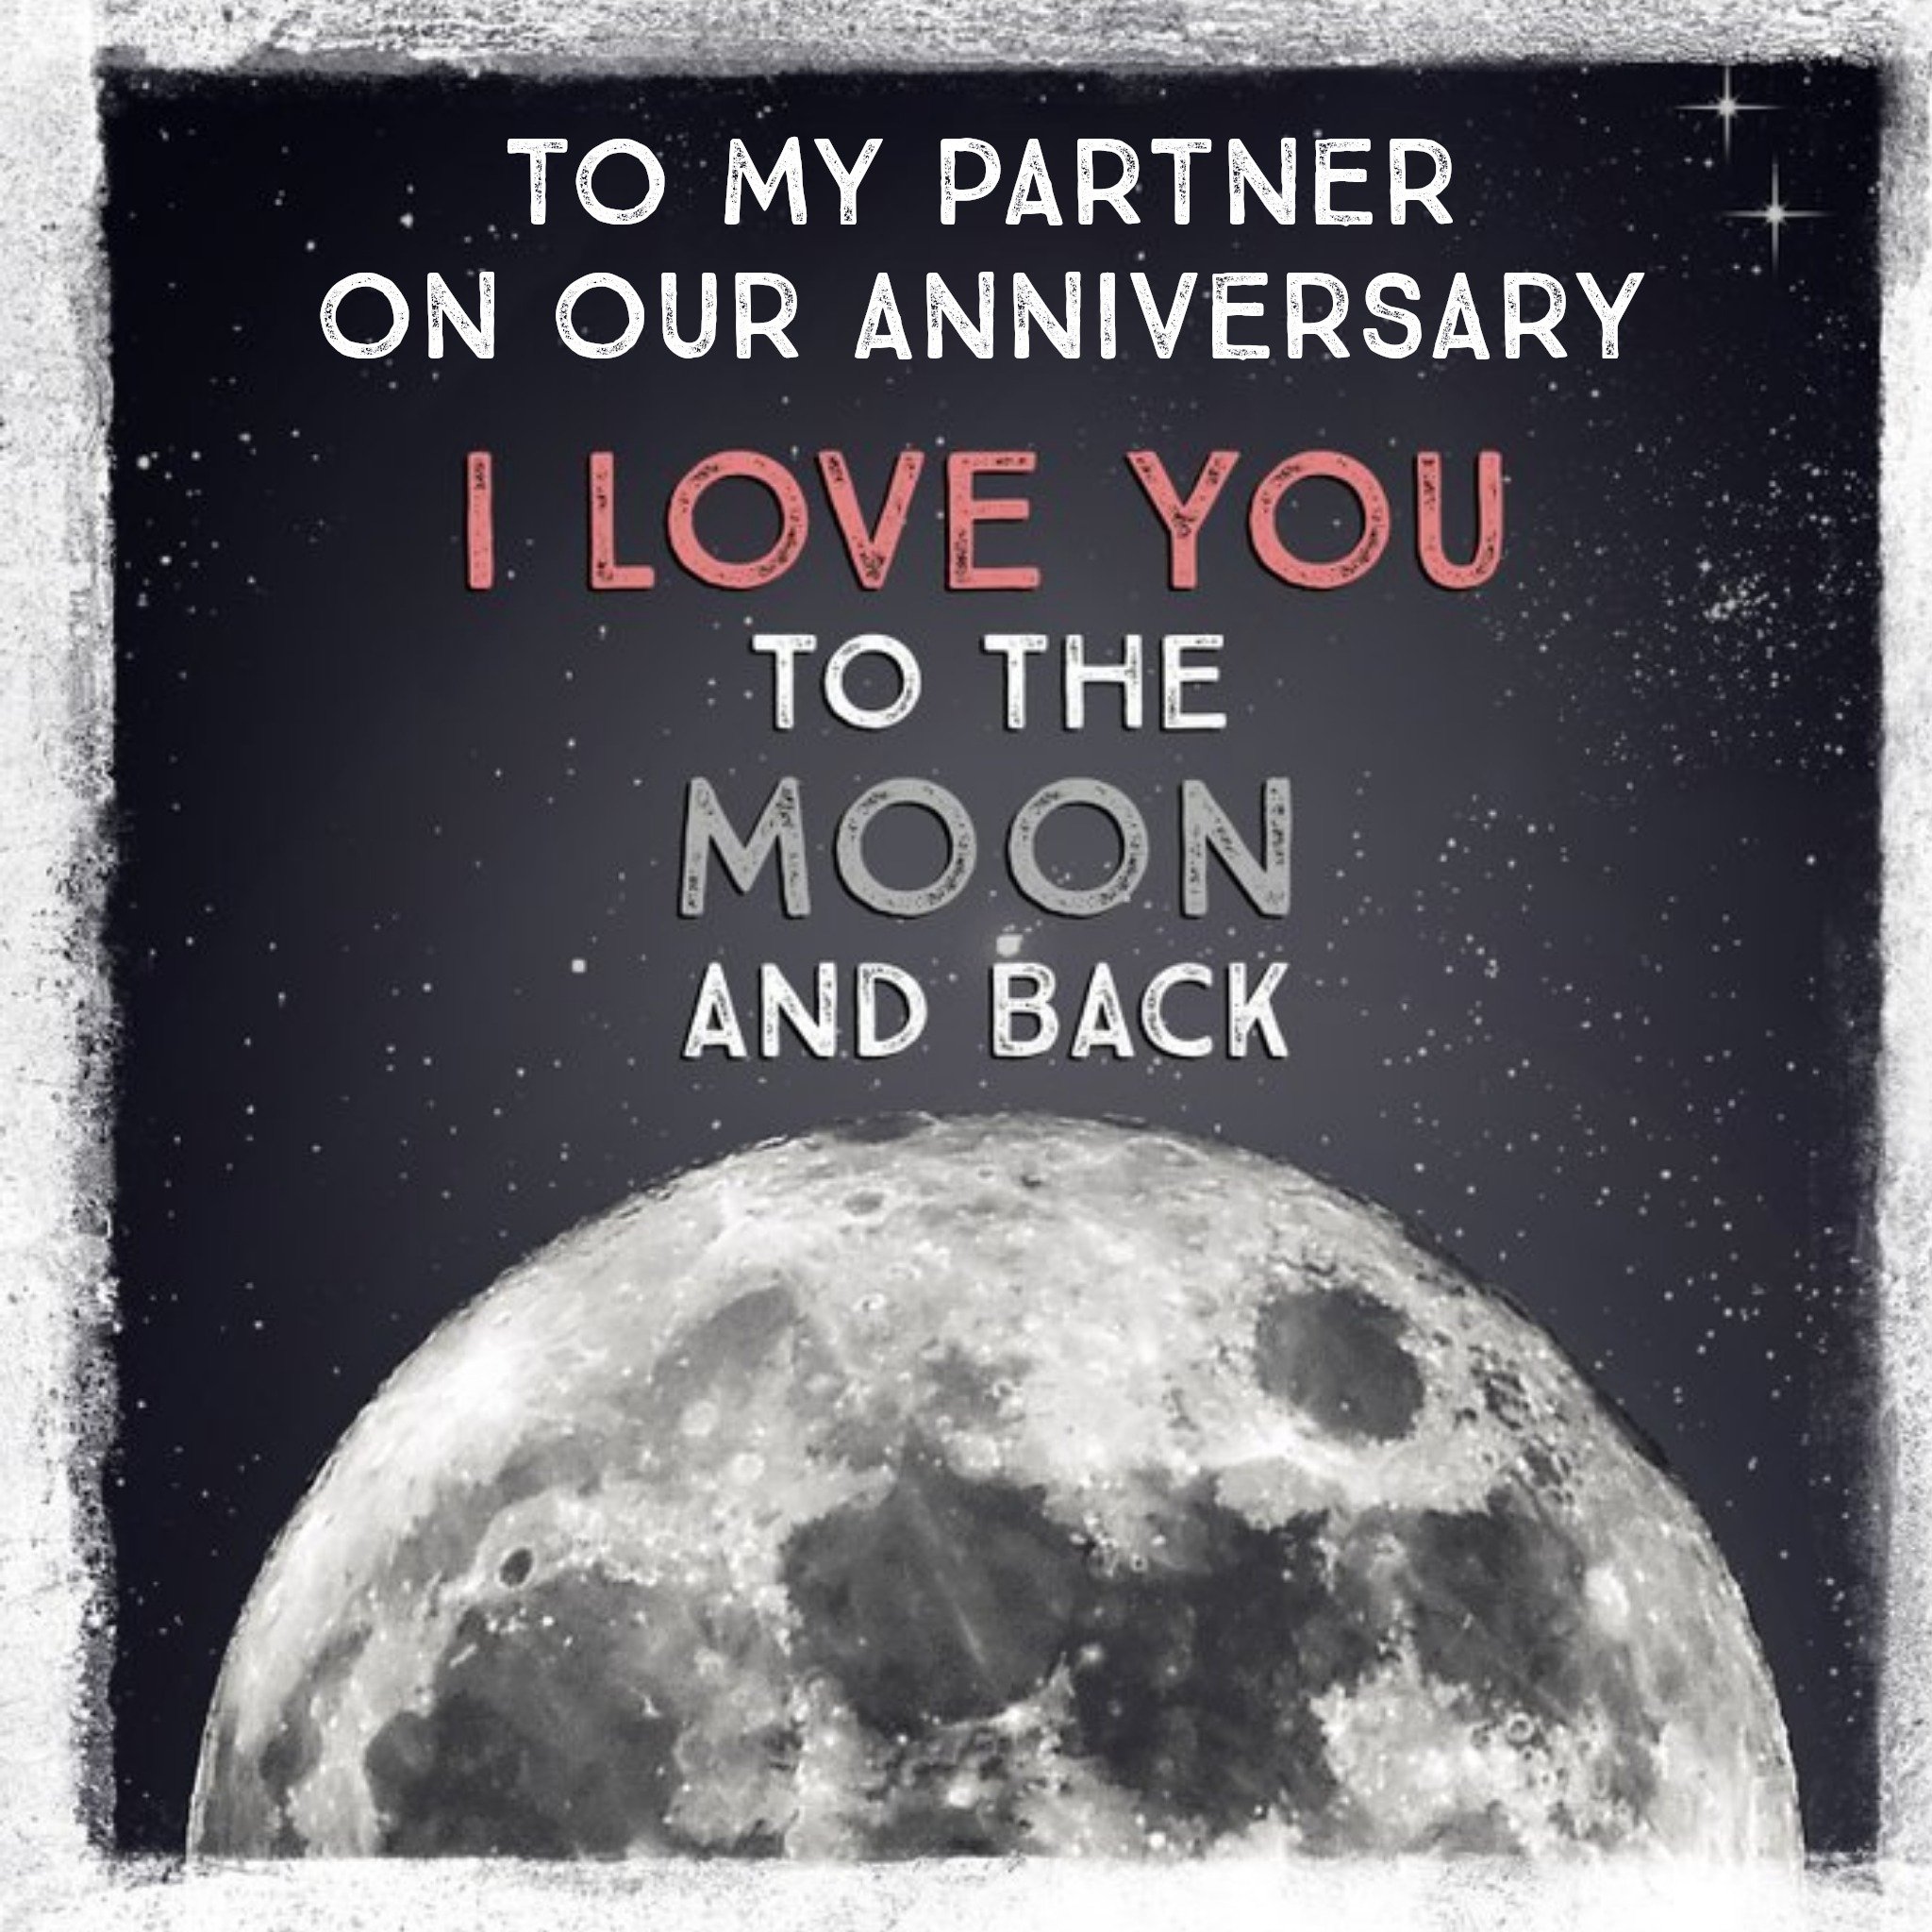 Moonpig To My Partner I Love You To The Moon And Back Anniversary Card, Square